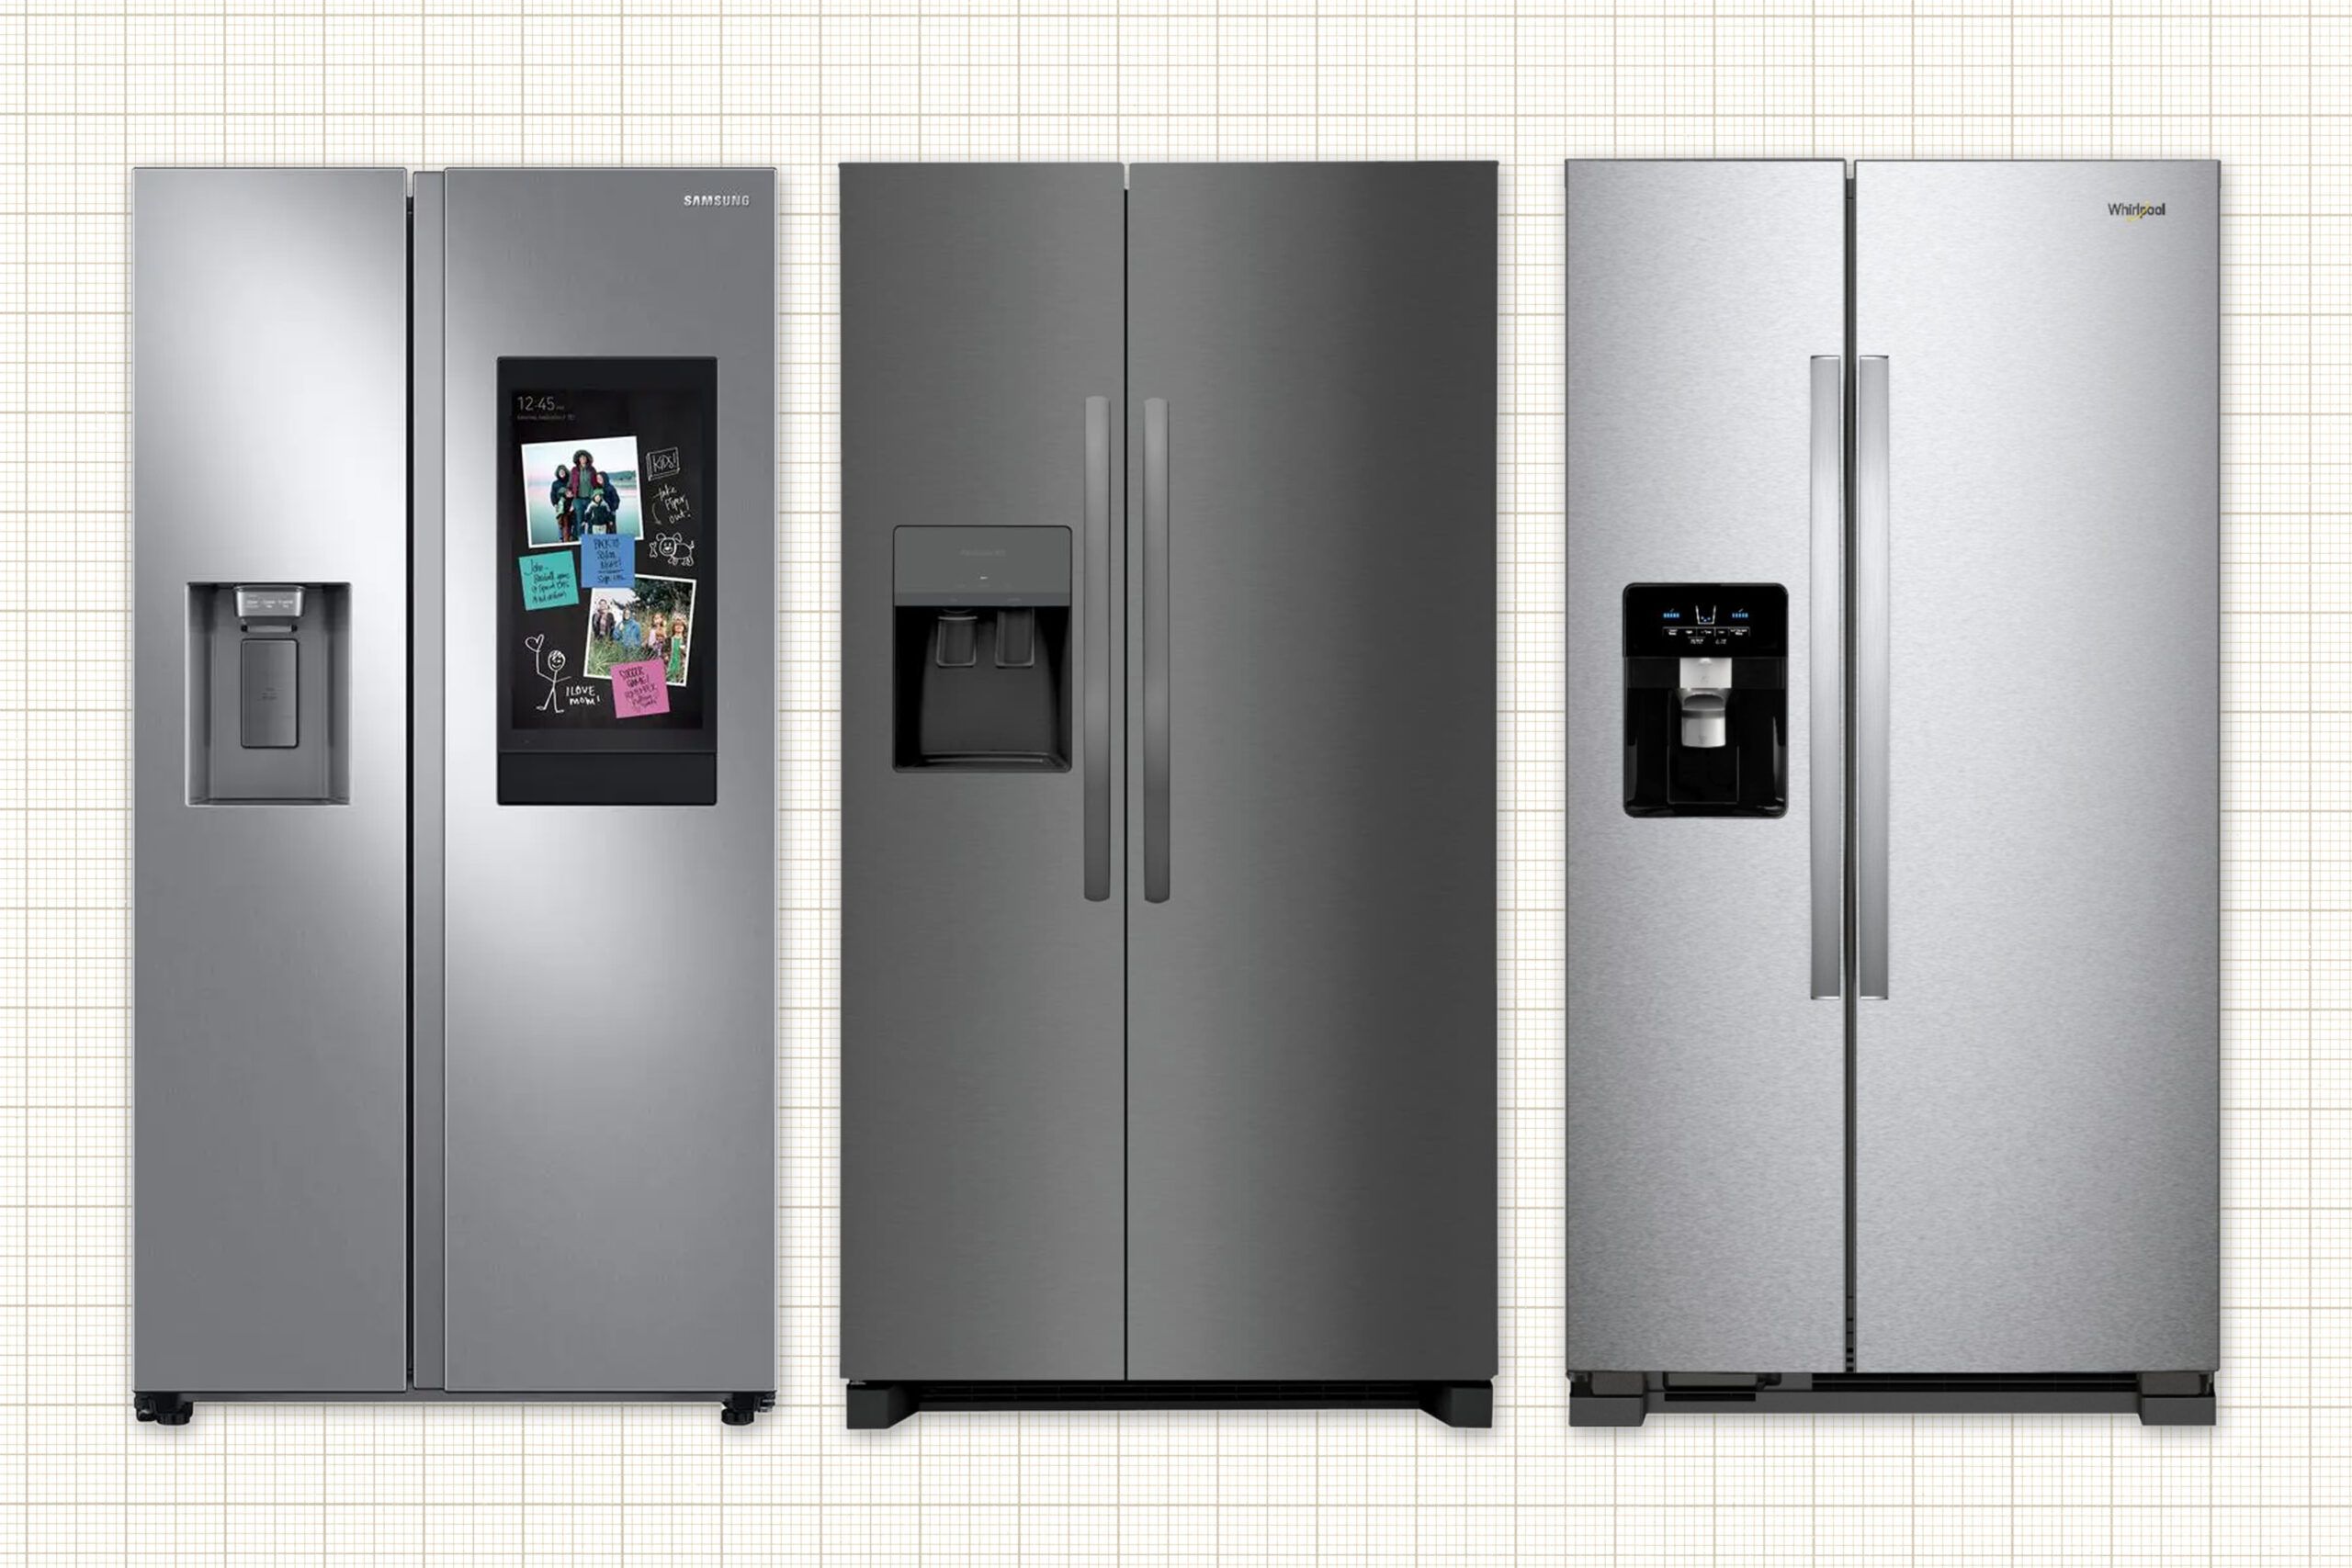 Samsung RS27T5561SR Side-by-Side Refrigerator, Frigidaire FRSS2623AS Side-by-Side Refrigerator, and Whirlpool WRS325SDHZ Side-by-Side Refrigerator isolated on an off-white grid paper background